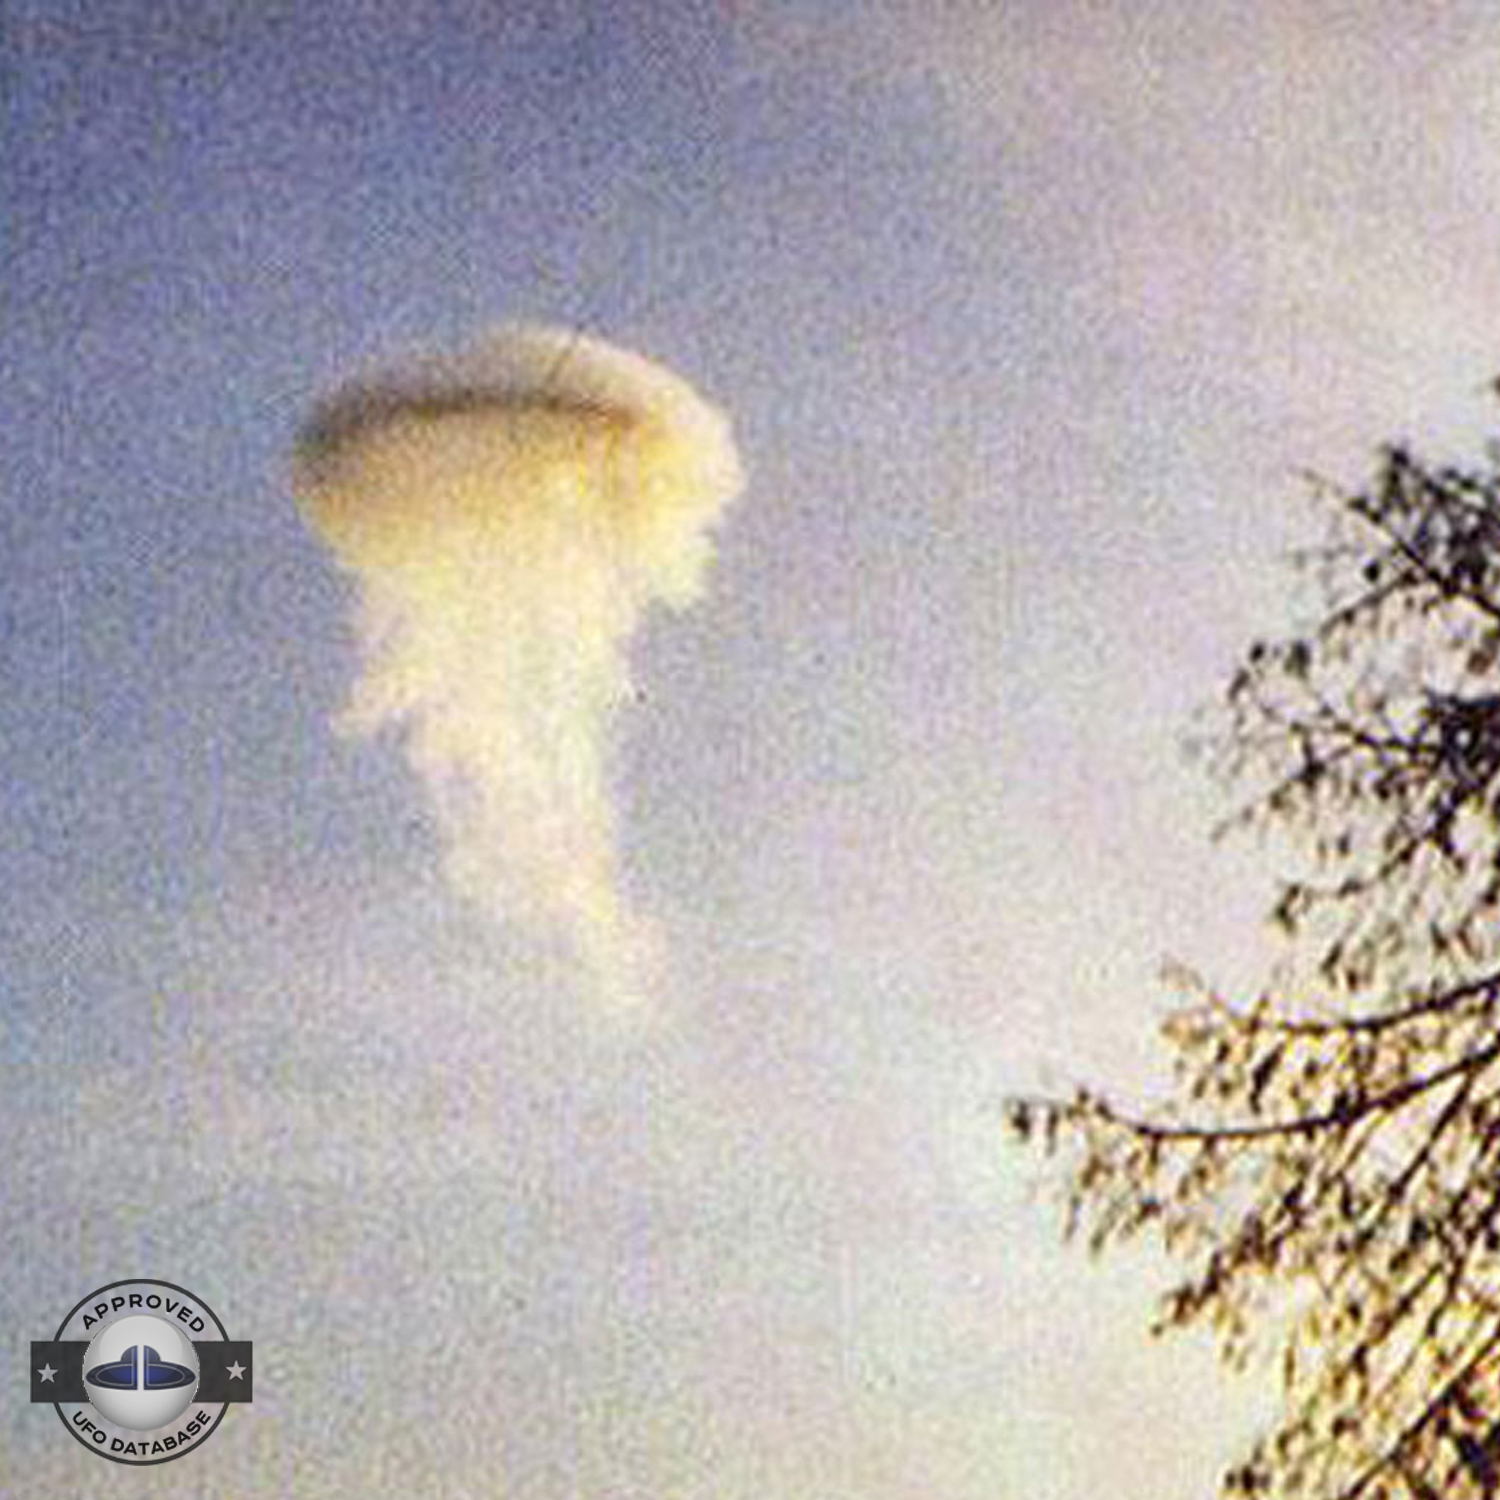 Best UFO picture showing UFO in Cloud disguise | Viborg, Denmark 1974 UFO Picture #222-2